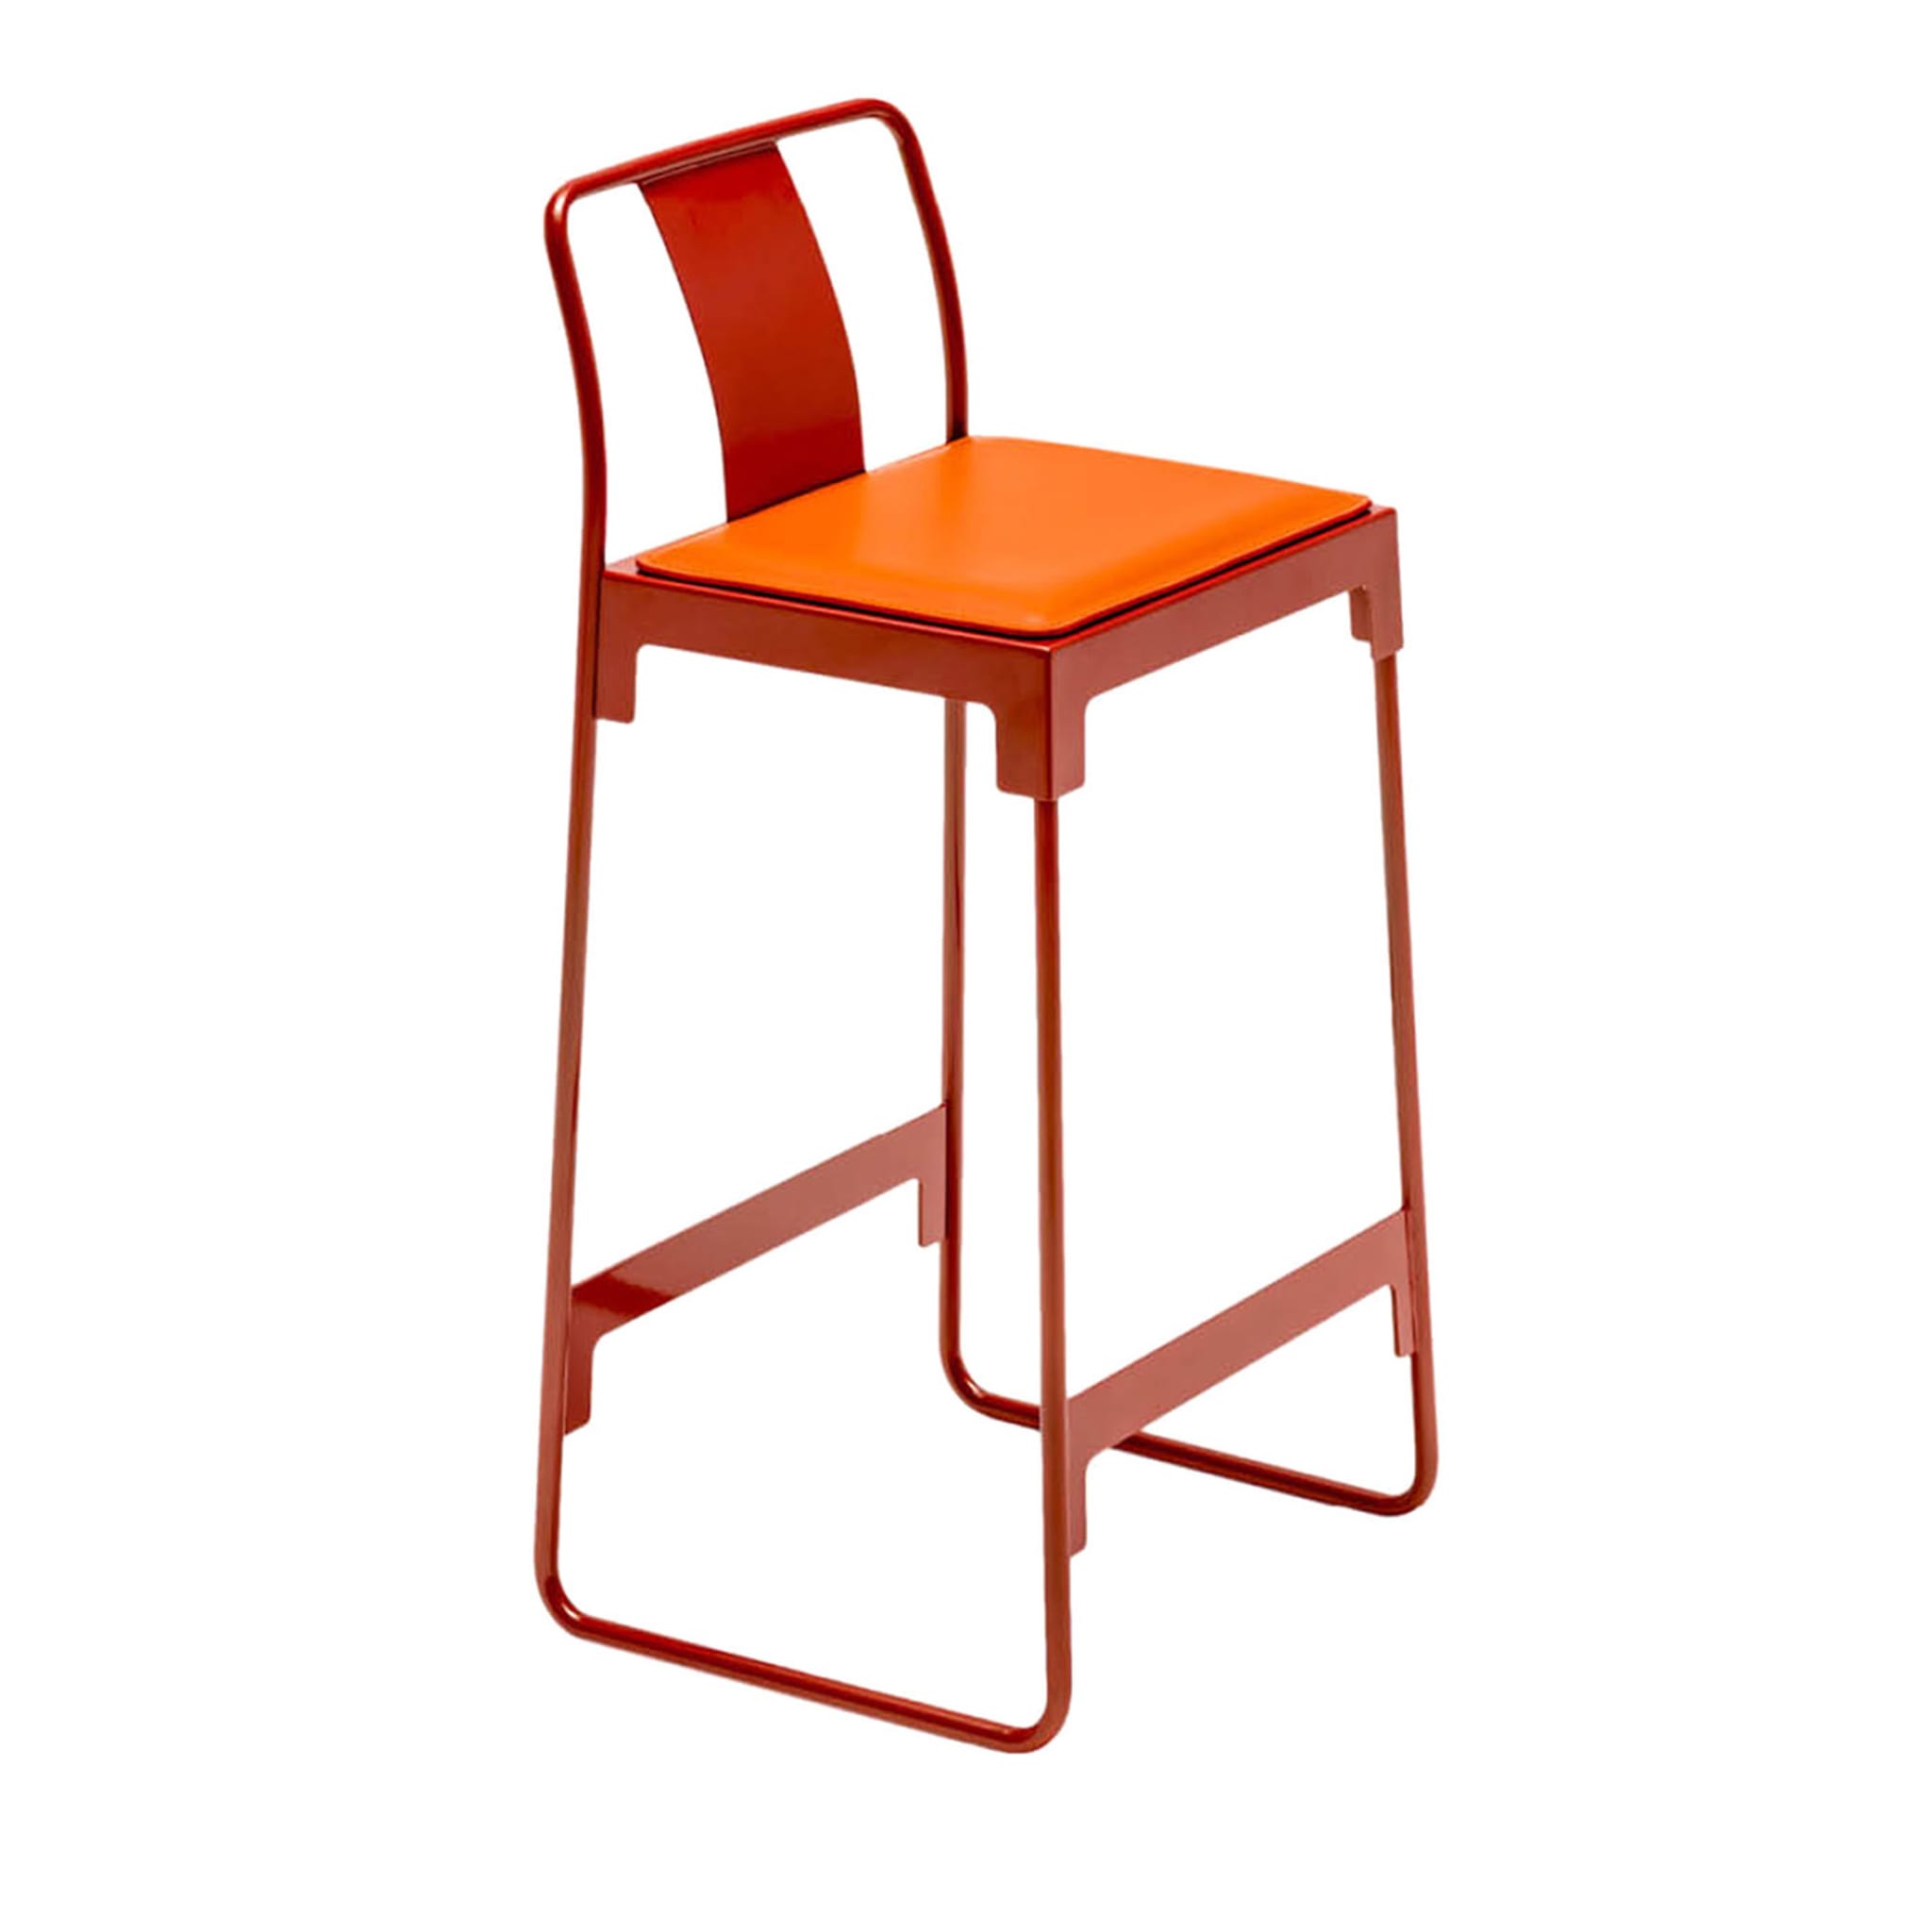 Mingx Low Orange Stool with Backrest by Konstantin Grcic - Main view